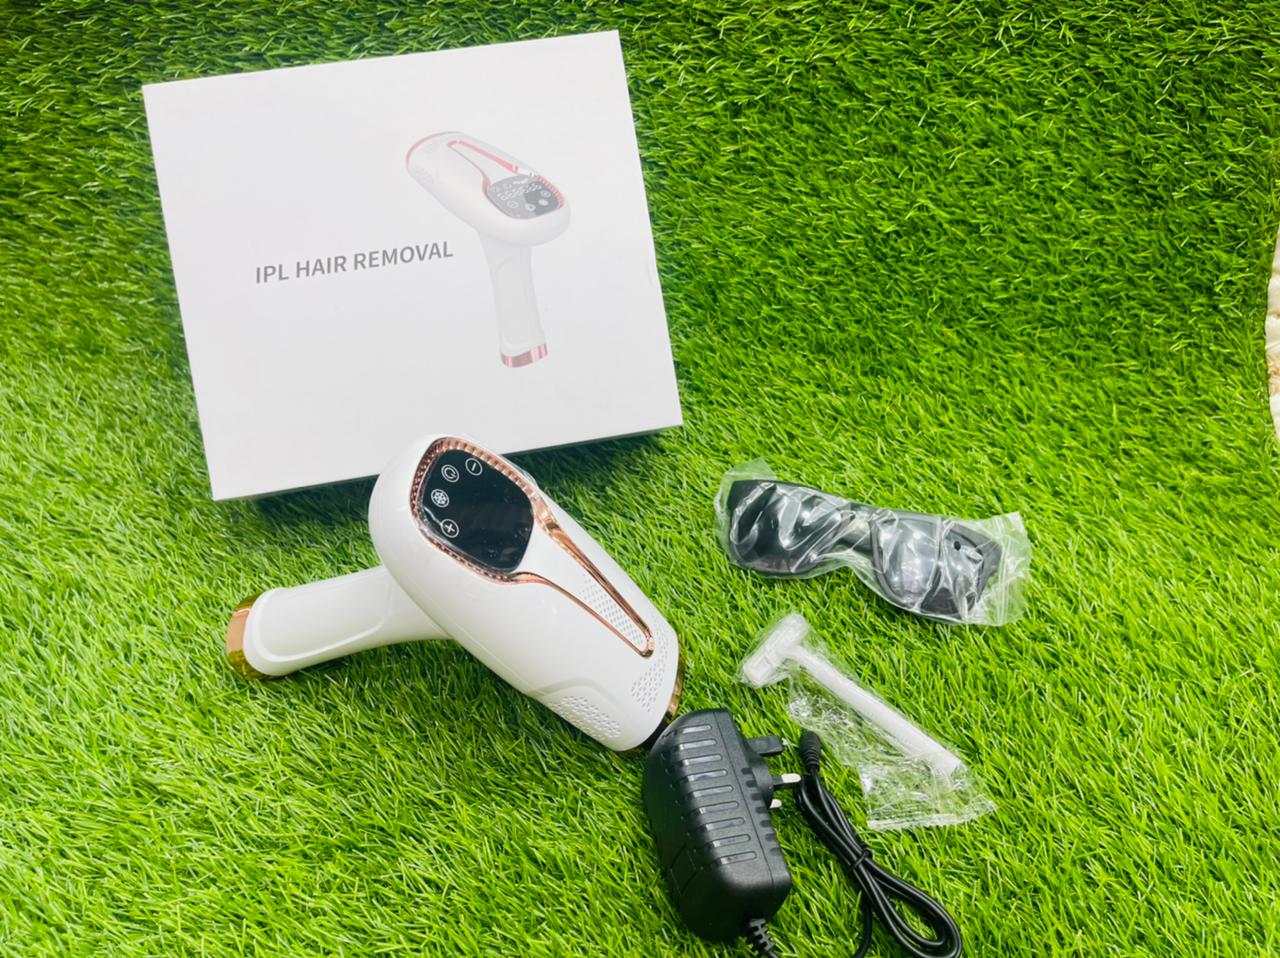 IPL HOME PULSED LIGHT HAIR REMOVAL MACHINE